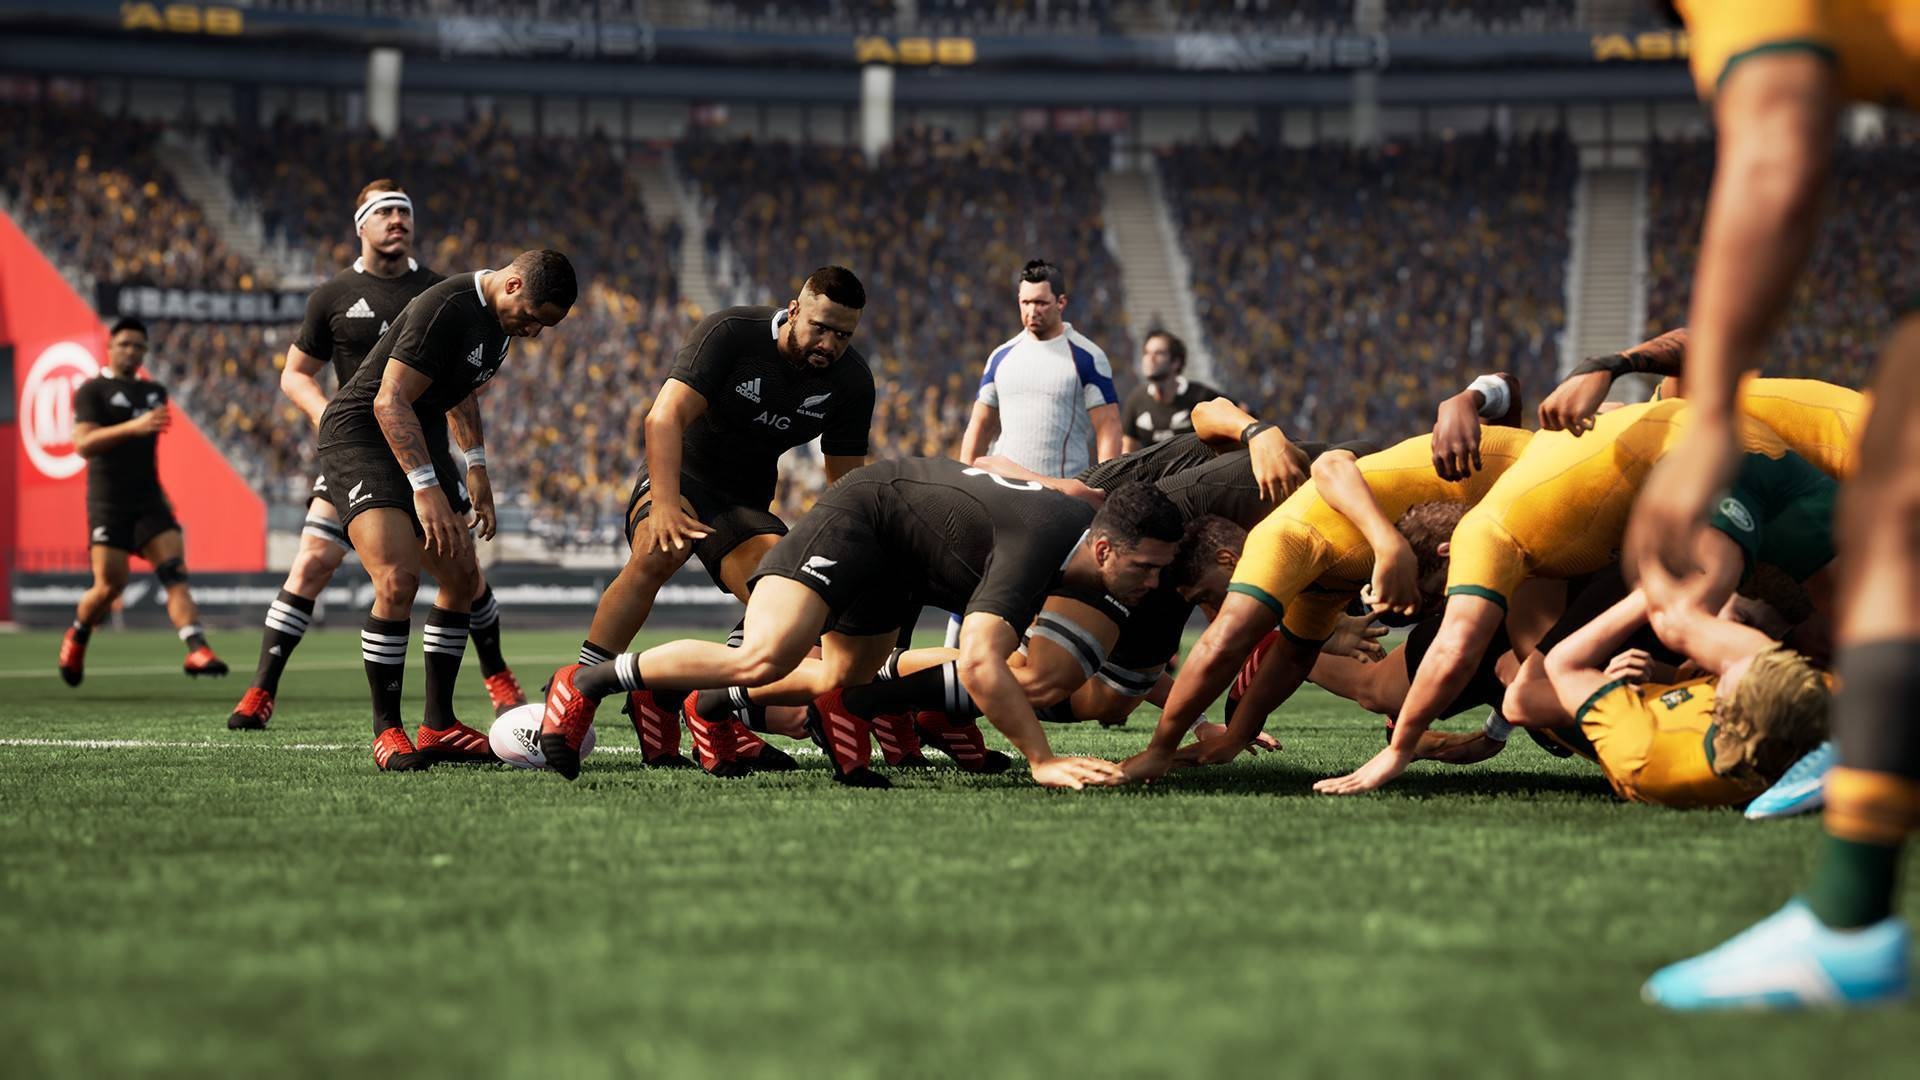 Rugby Challenge 4, Xbox One game, Exciting gameplay, Rugby simulation, 1920x1080 Full HD Desktop